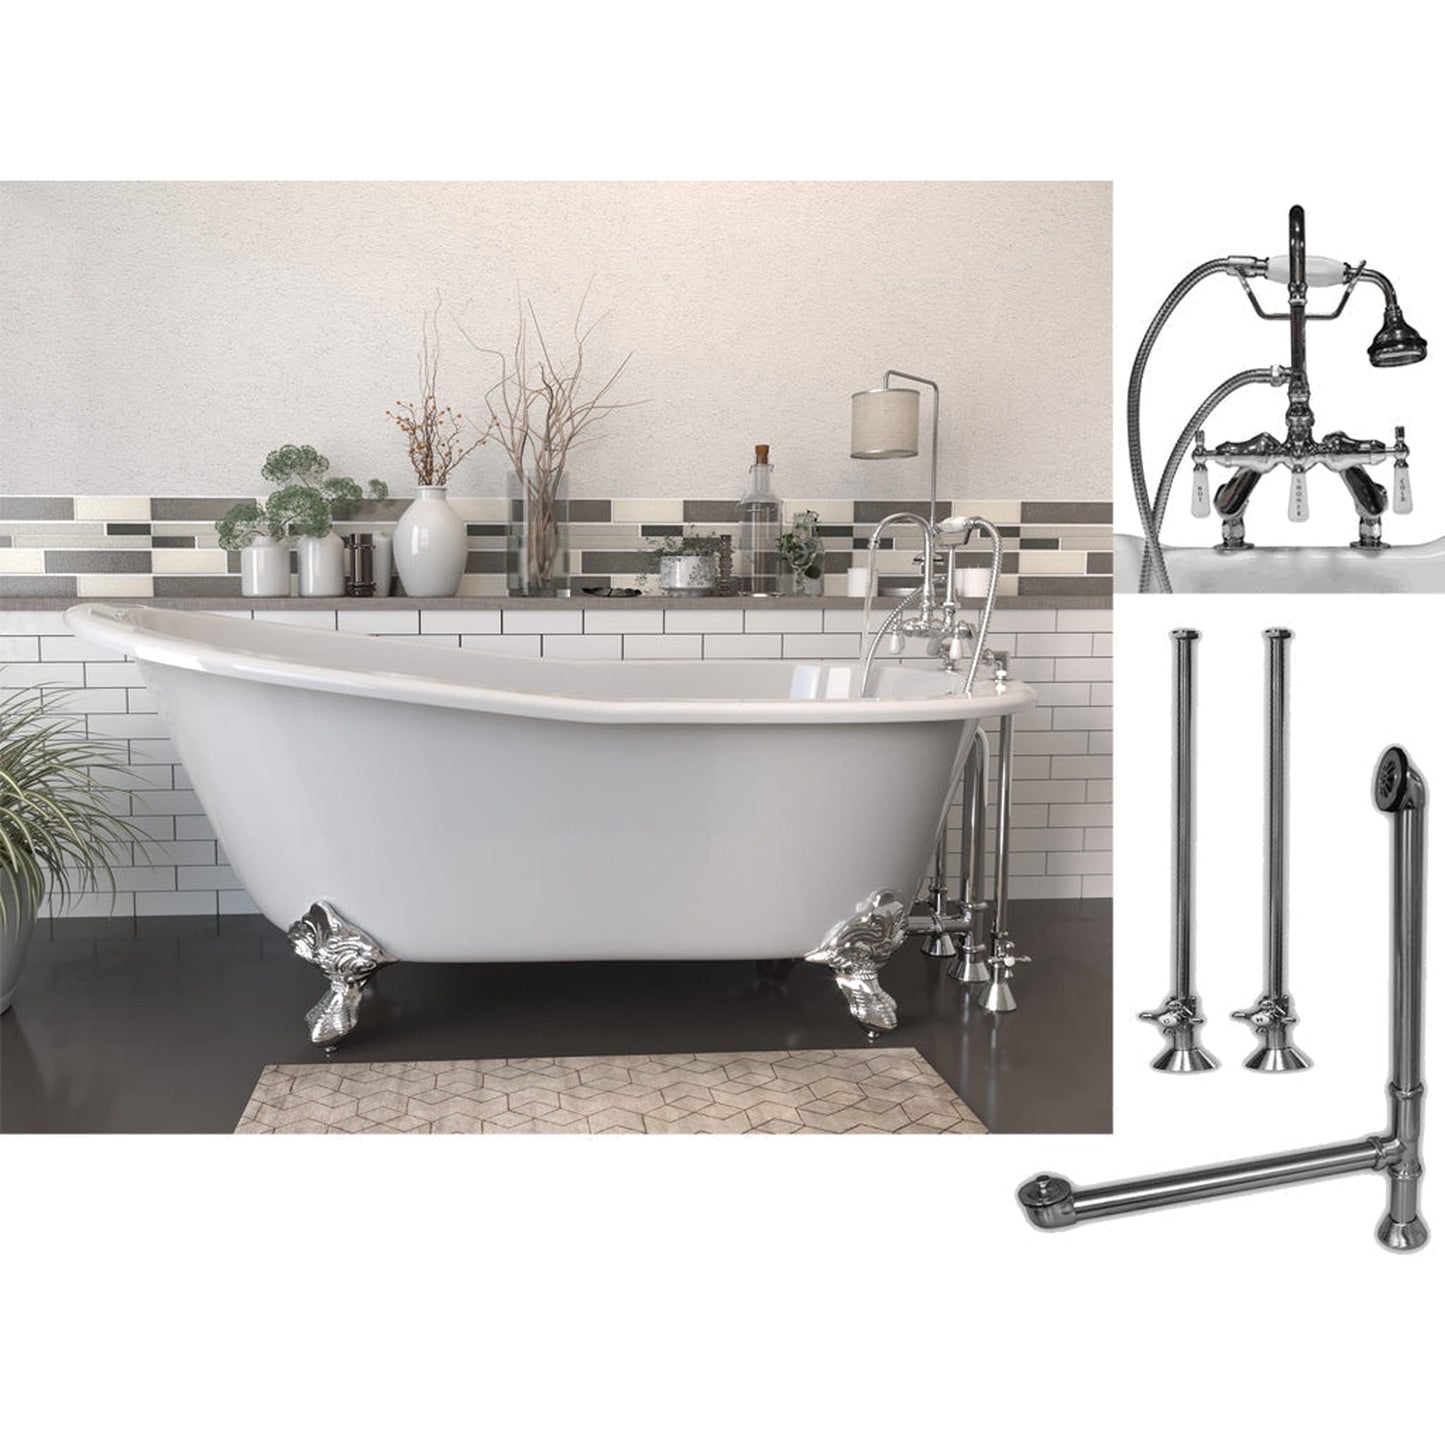 Cambridge Plumbing 61" White Cast Iron Clawfoot Bathtub With Deck Holes And Complete Plumbing Package Including Porcelain Lever English Telephone Brass Faucet, Supply Lines, Drain And Overflow Assembly In Polished Chrome